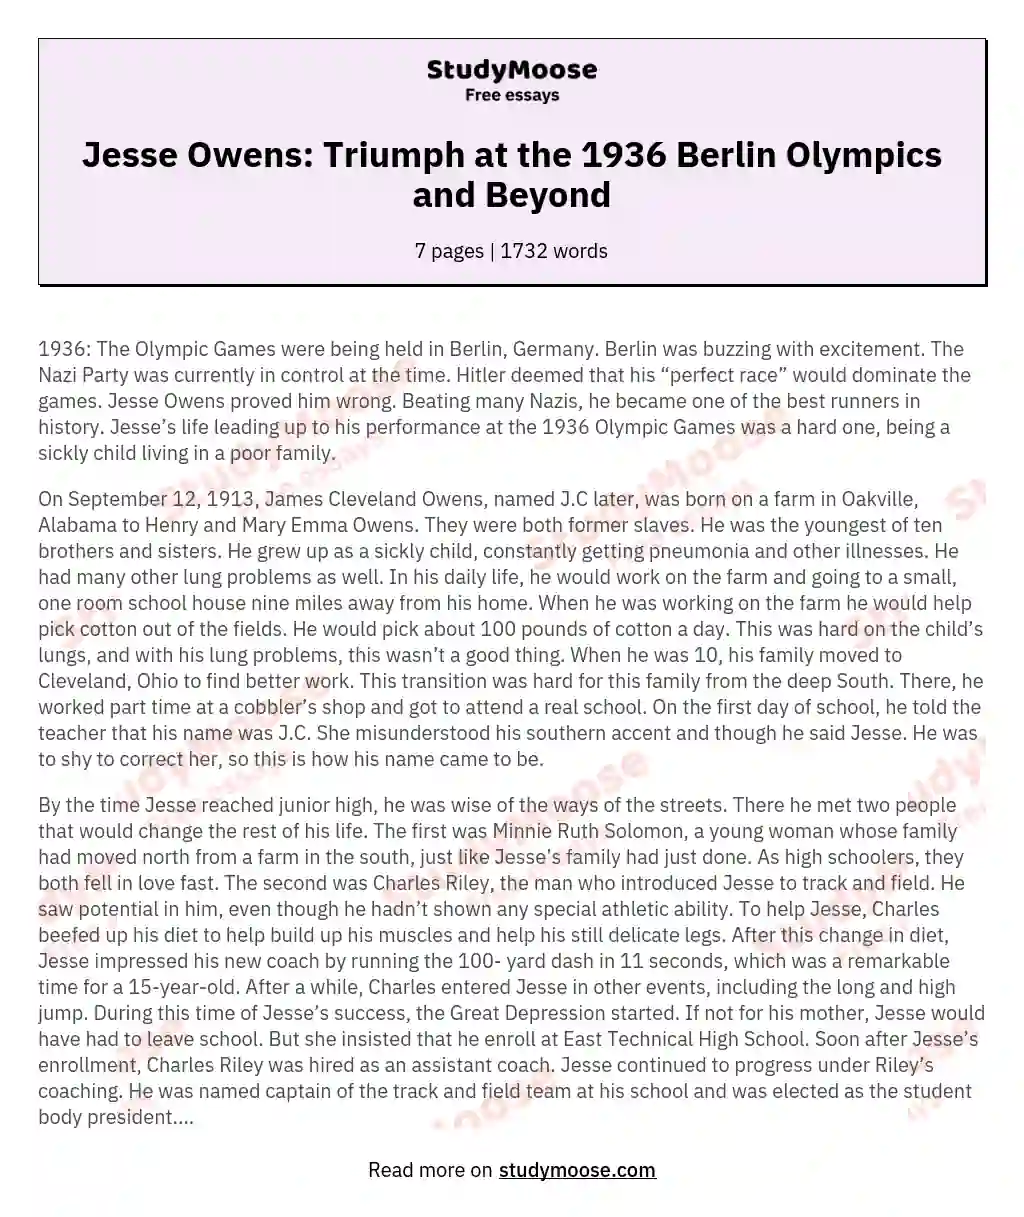 Jesse Owens: Triumph at the 1936 Berlin Olympics and Beyond essay